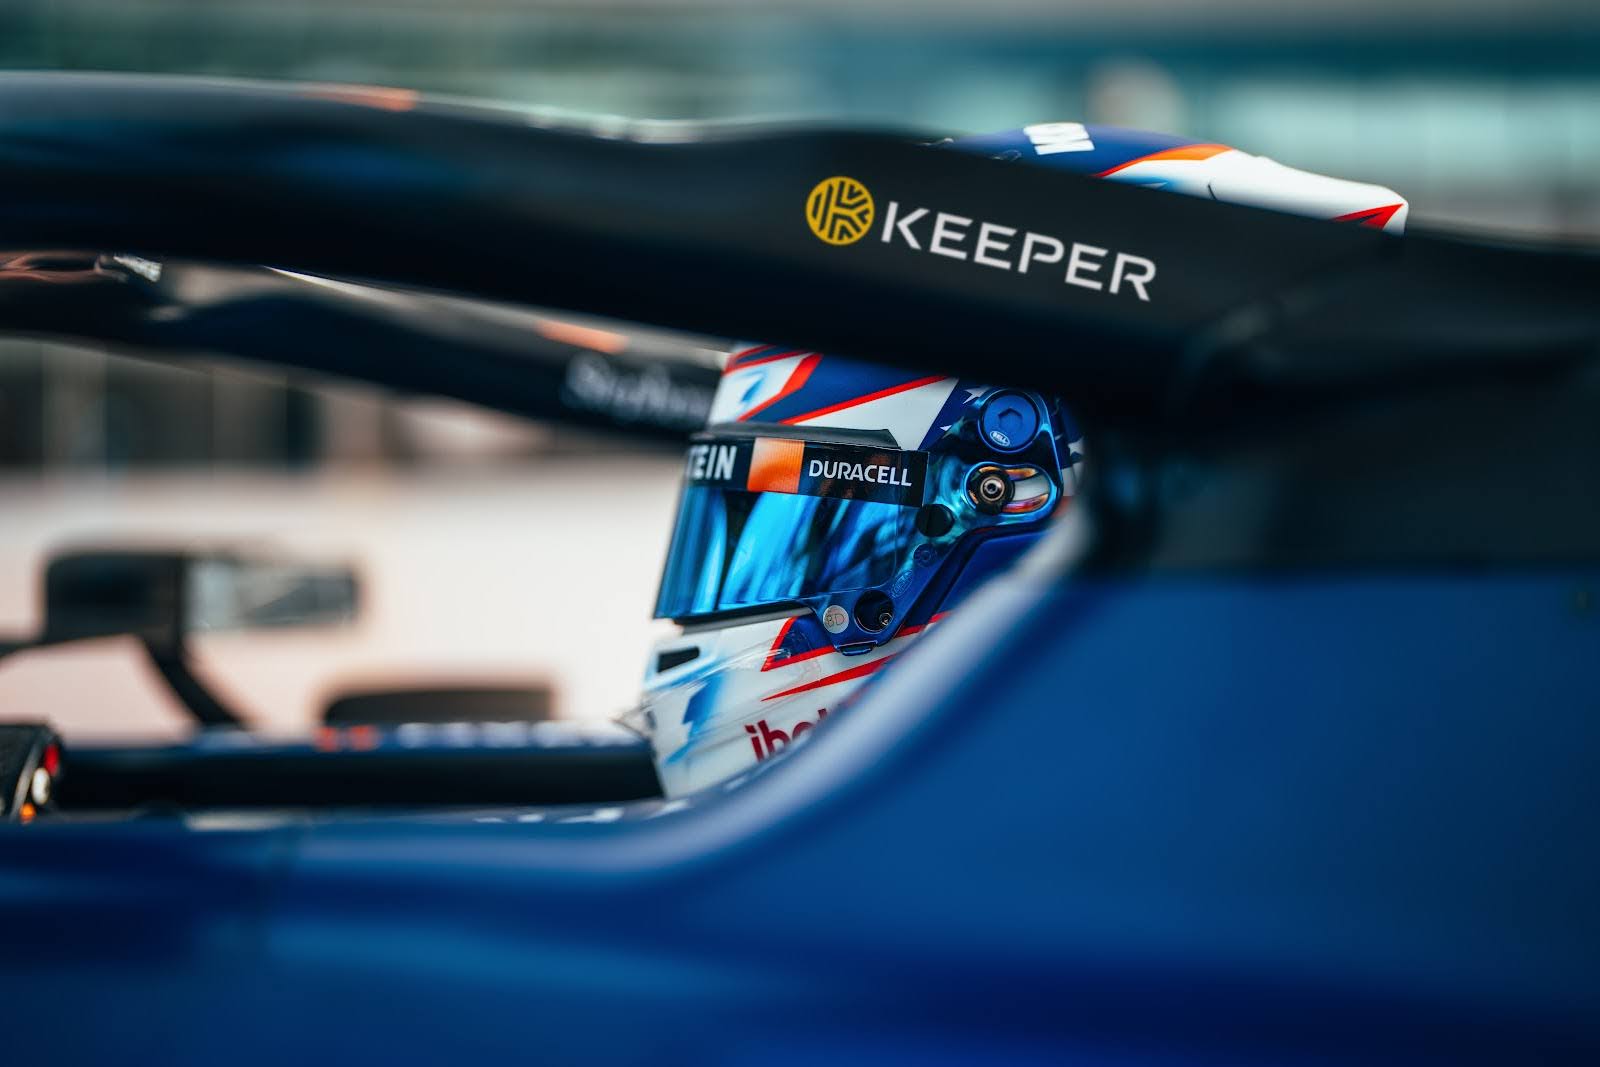 Keeper Security Forges Cybersecurity Partnership With Williams Racing